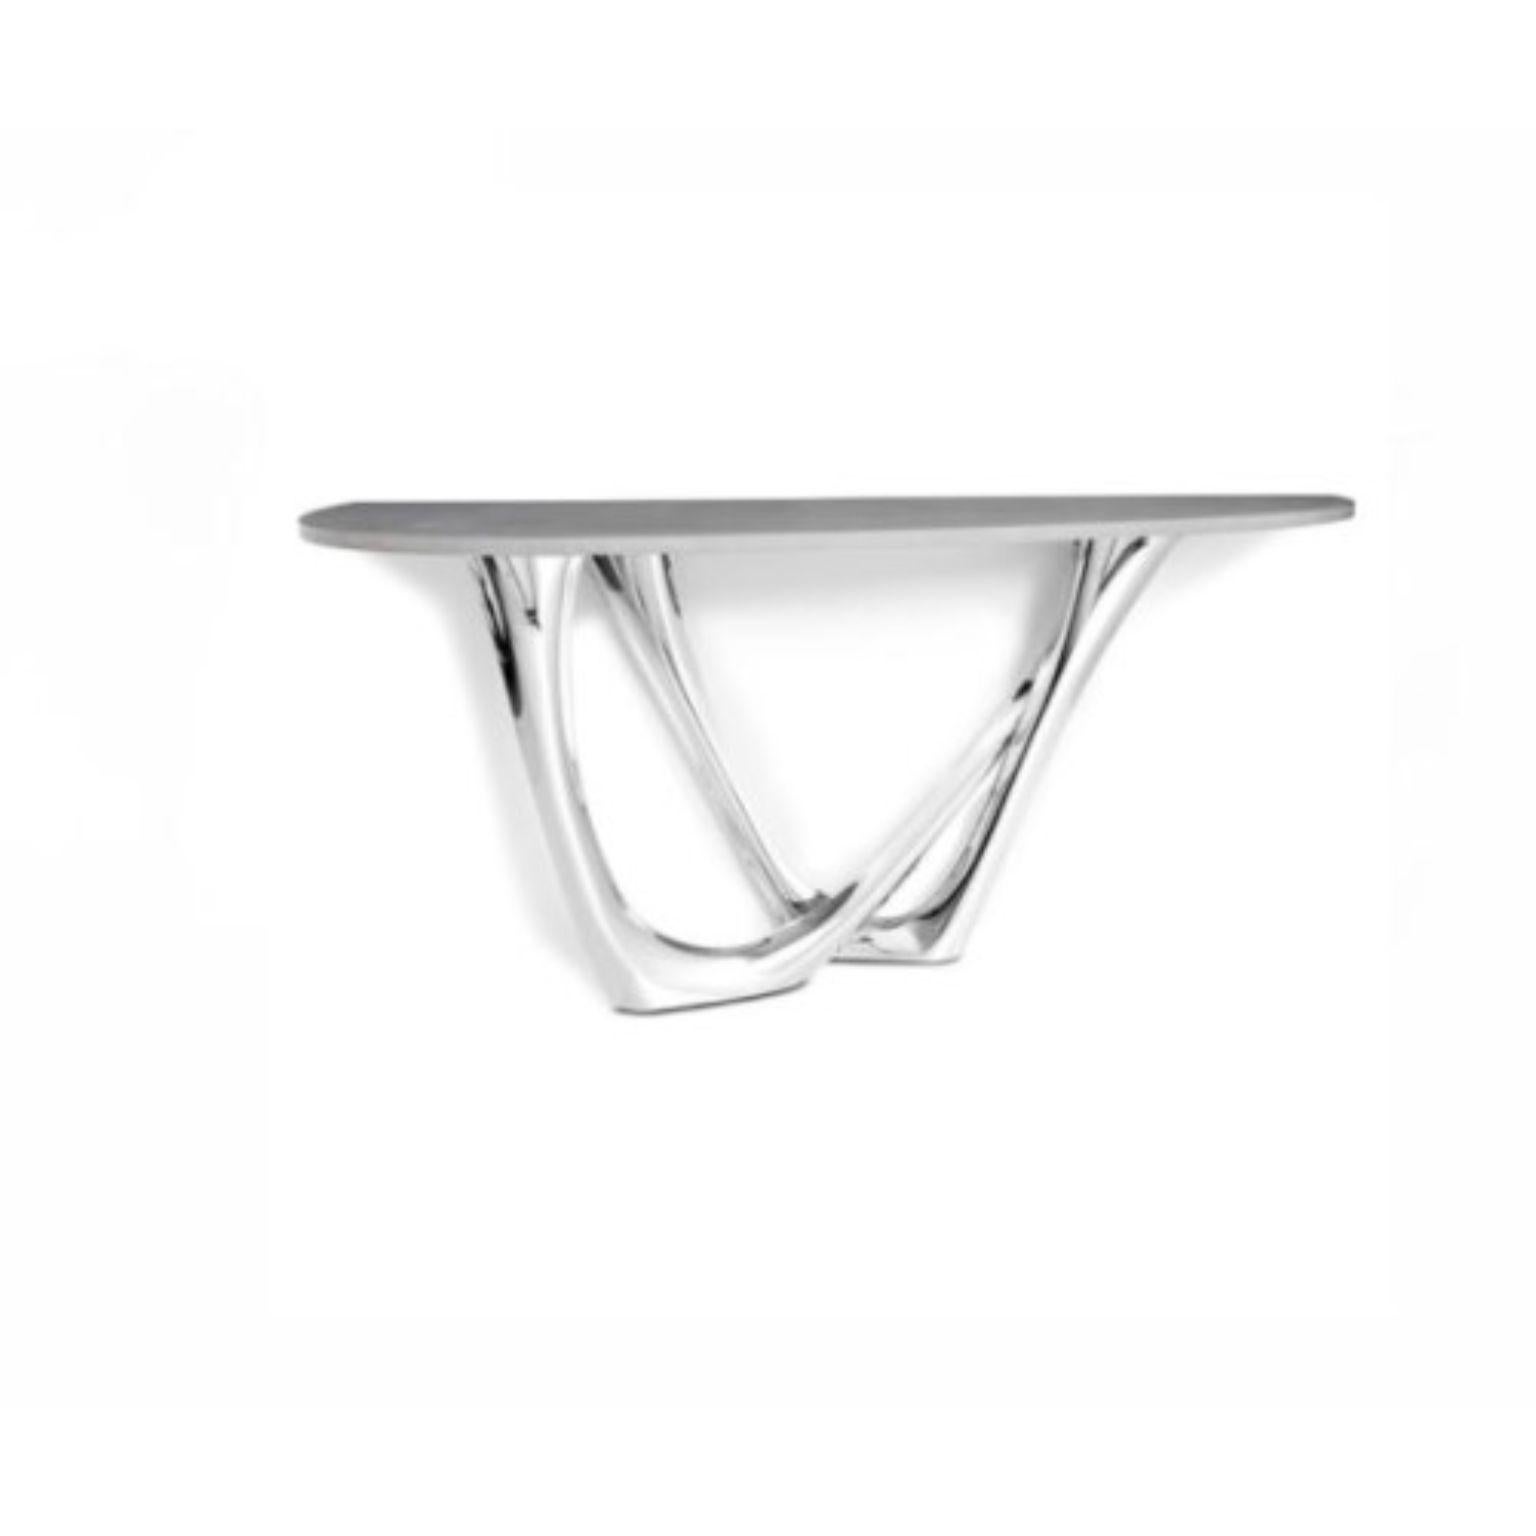 Polished G-Console concrete top and stainless base by Zieta
Dimensions: D 56 x W 168 x H 75 cm 
Material: Stainless steel, concrete.
Also available in different colors and dimensions.

G-Console is another bionic object in our collection. Created